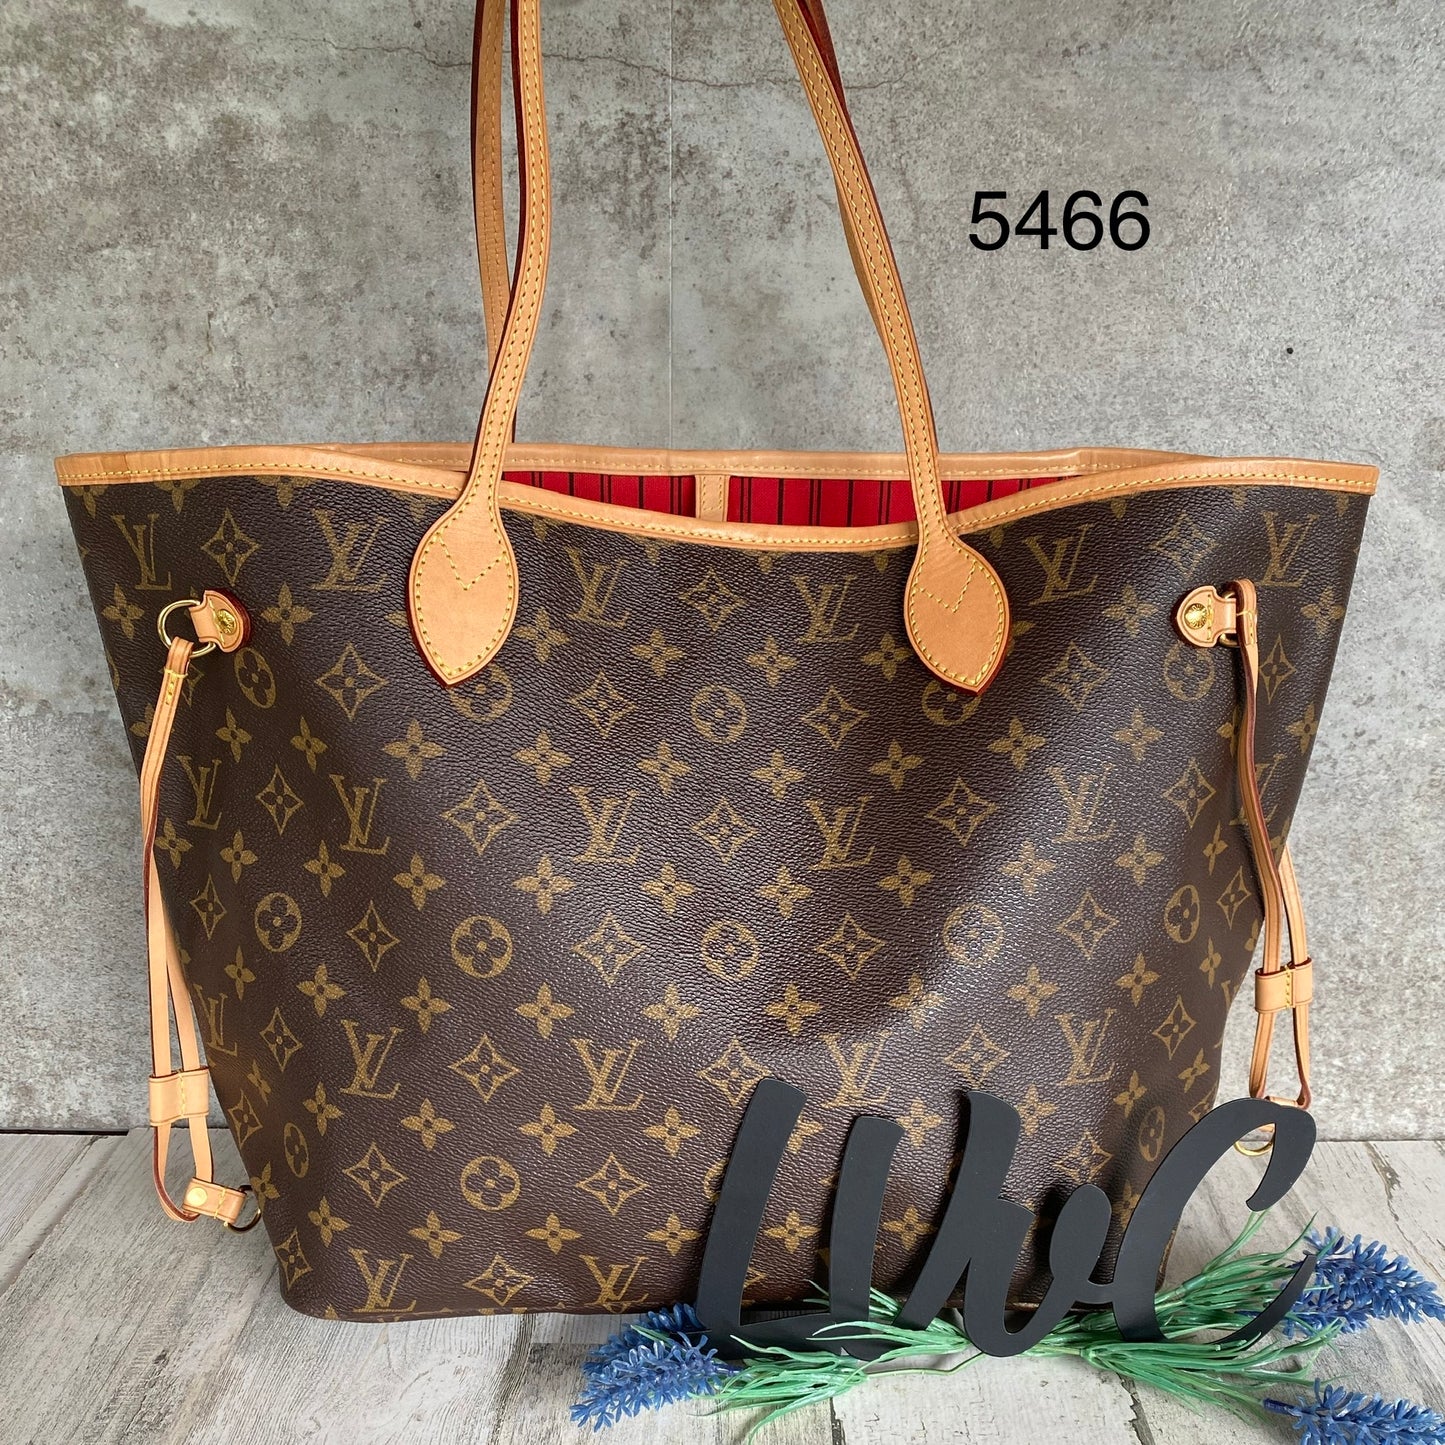 Classic Authentic Louis Vuitton Neverfull MM Monogram Shoulder Bag -  clothing & accessories - by owner - apparel sale